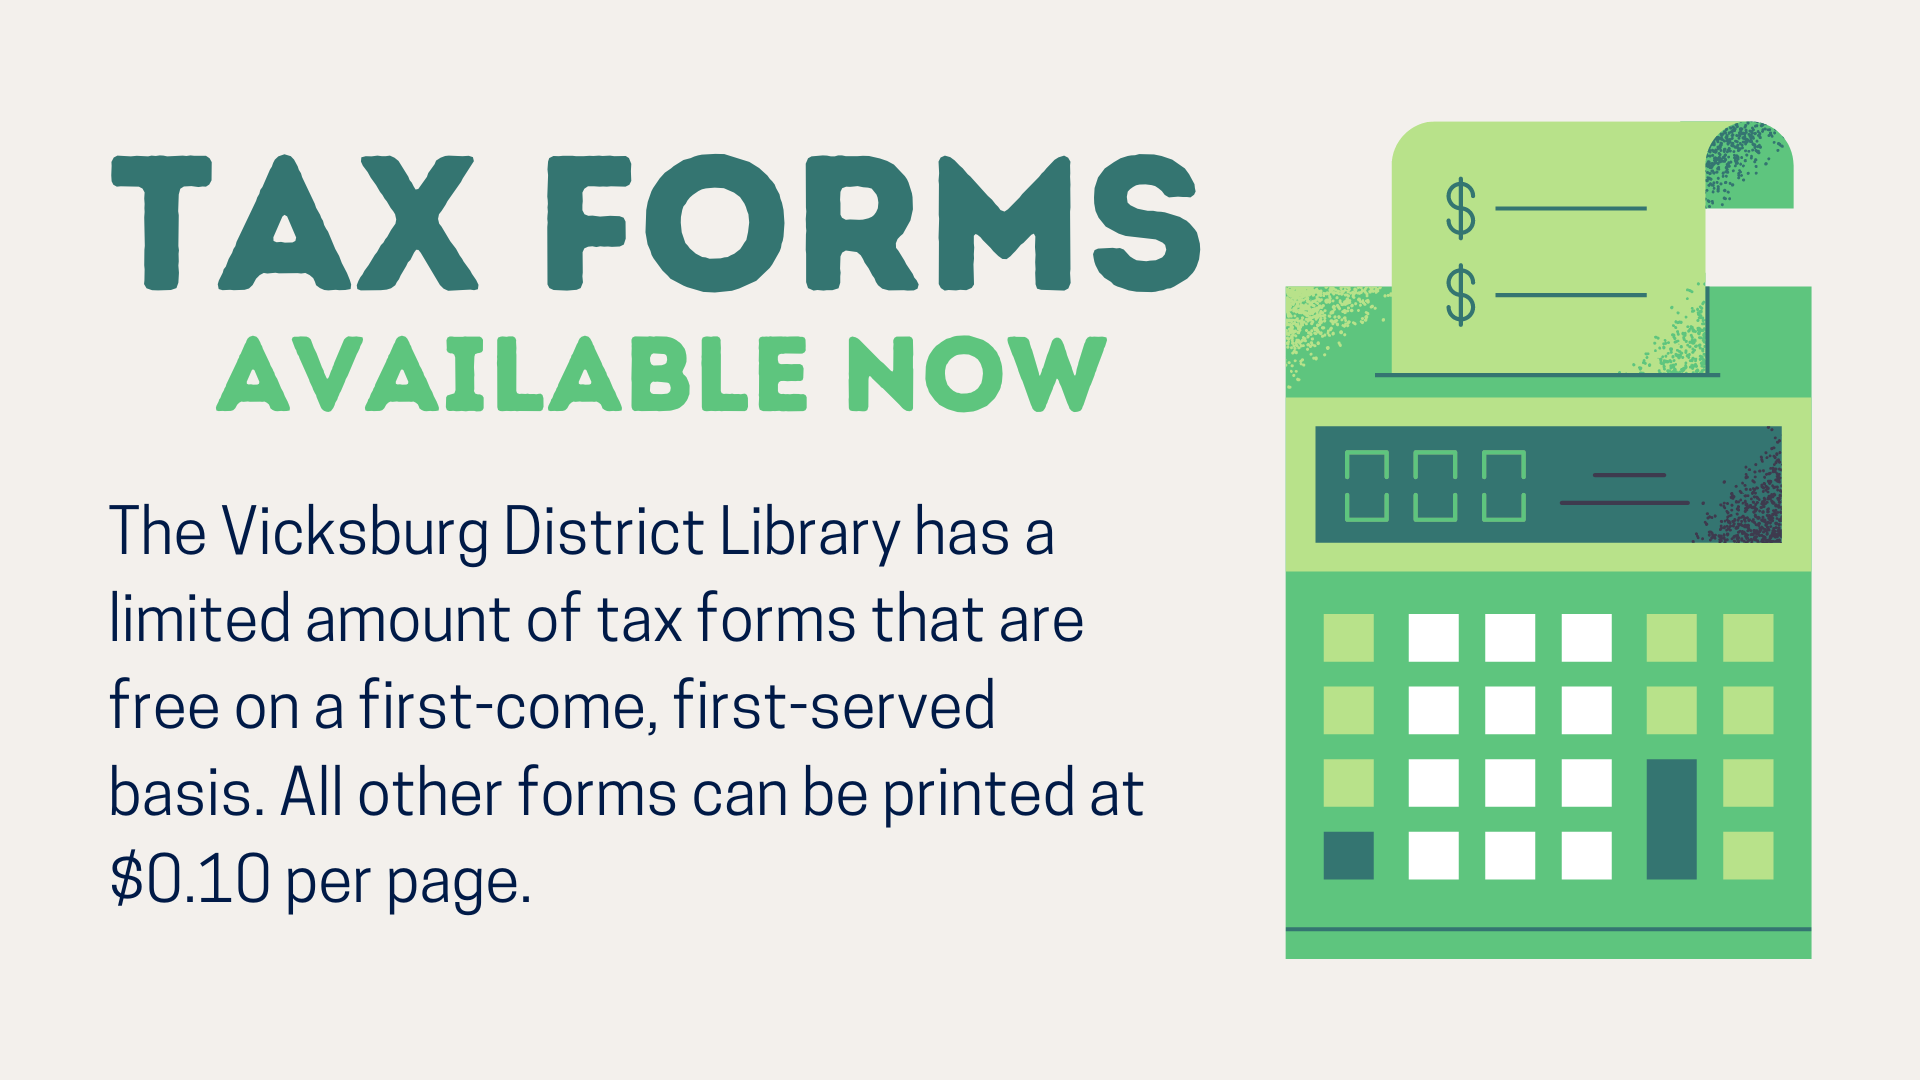 Tax forms are available at the library. We can print any forms we don't have.